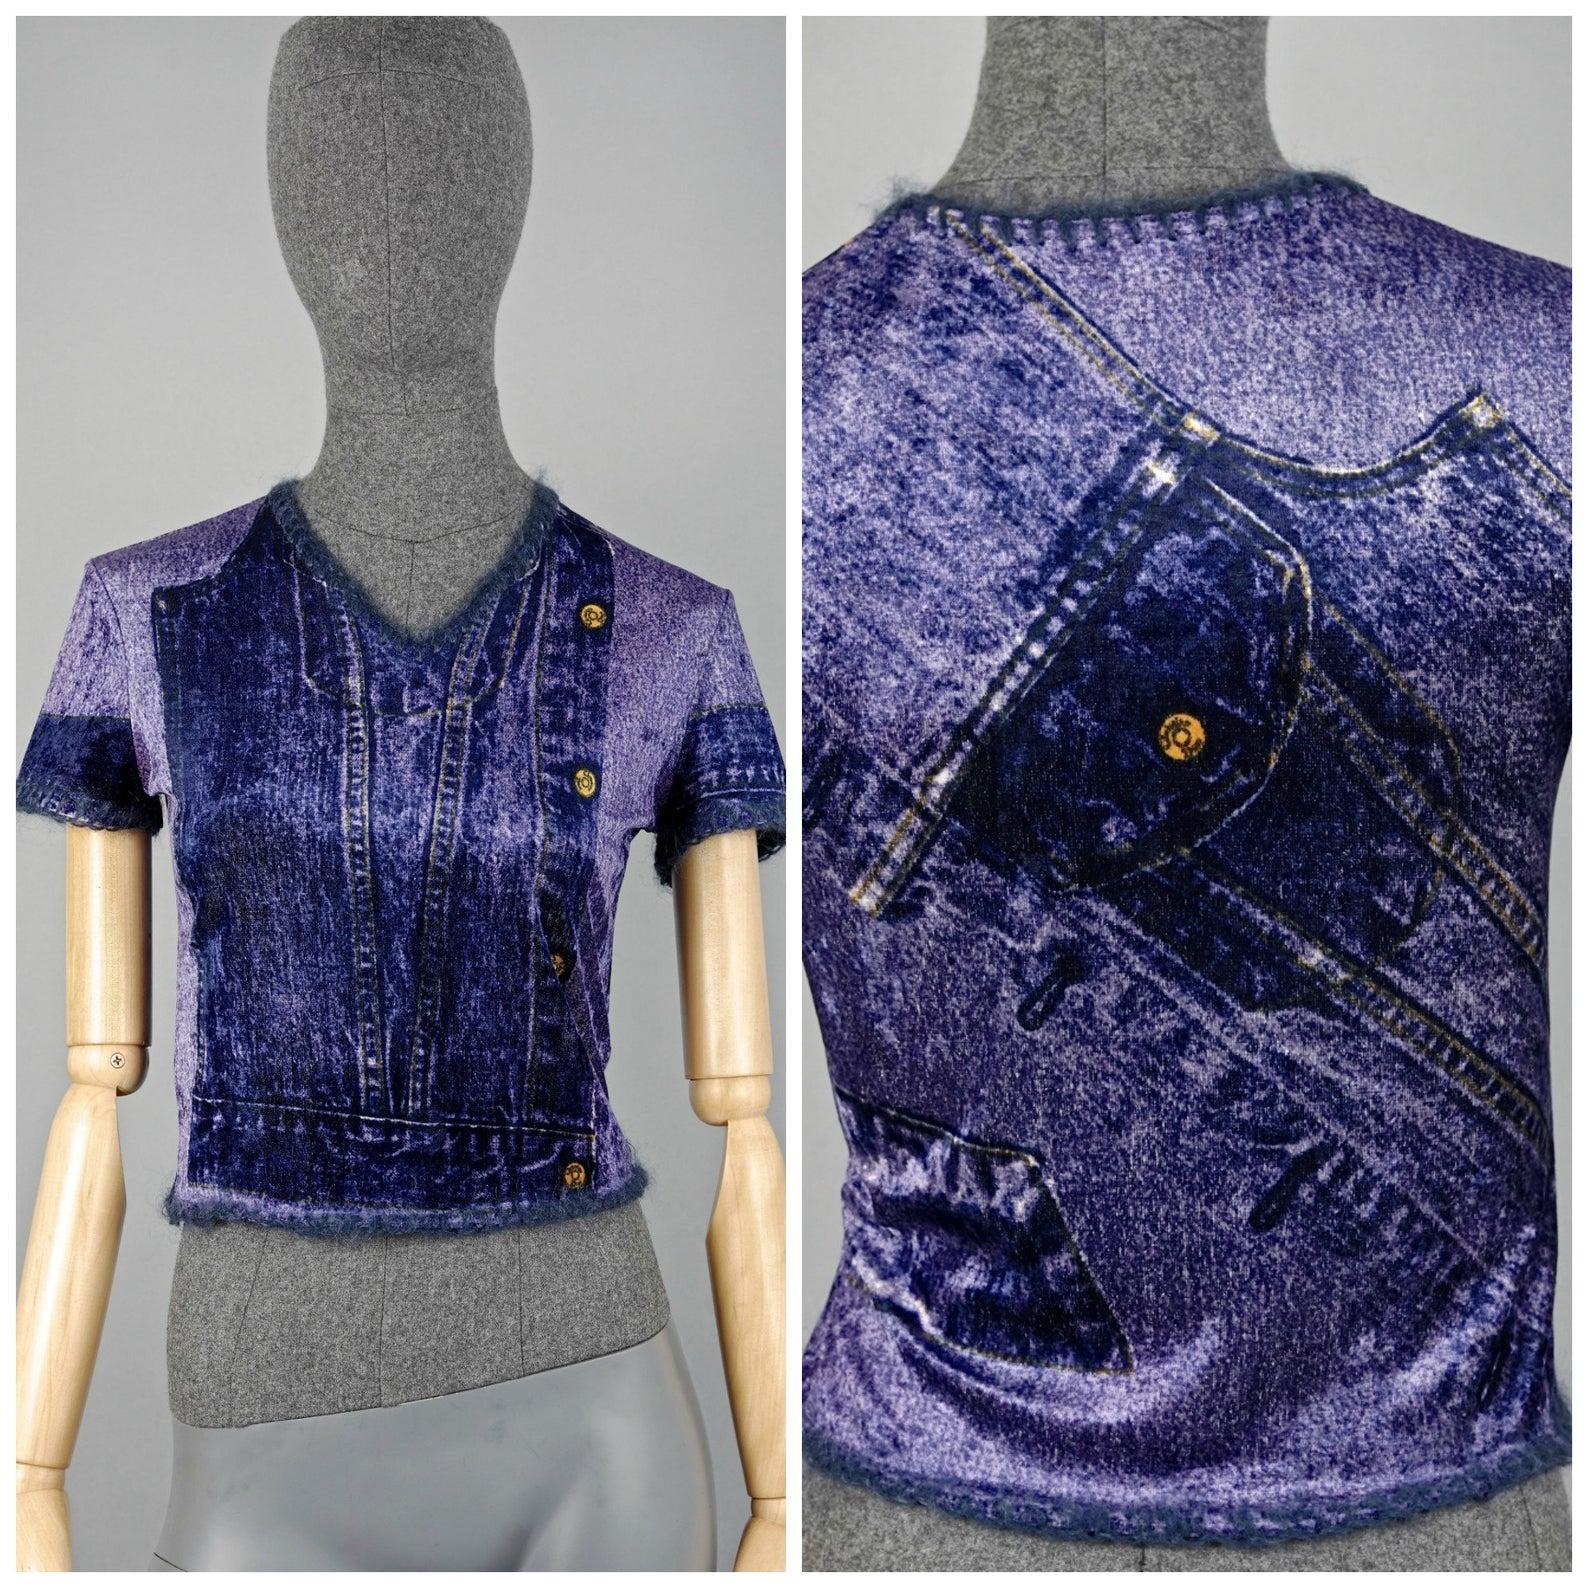 Vintage CHRISTIAN DIOR Velvet Denim Print Mohair Trimming Top Shirt

Measurements taken laid flat, please double bust and waist:
Shoulders: 15.15 inches (38.5 cm) without stretching
Sleeves: 6.29 inches (16 cm)
Bust: 17 inches (43 cm) without